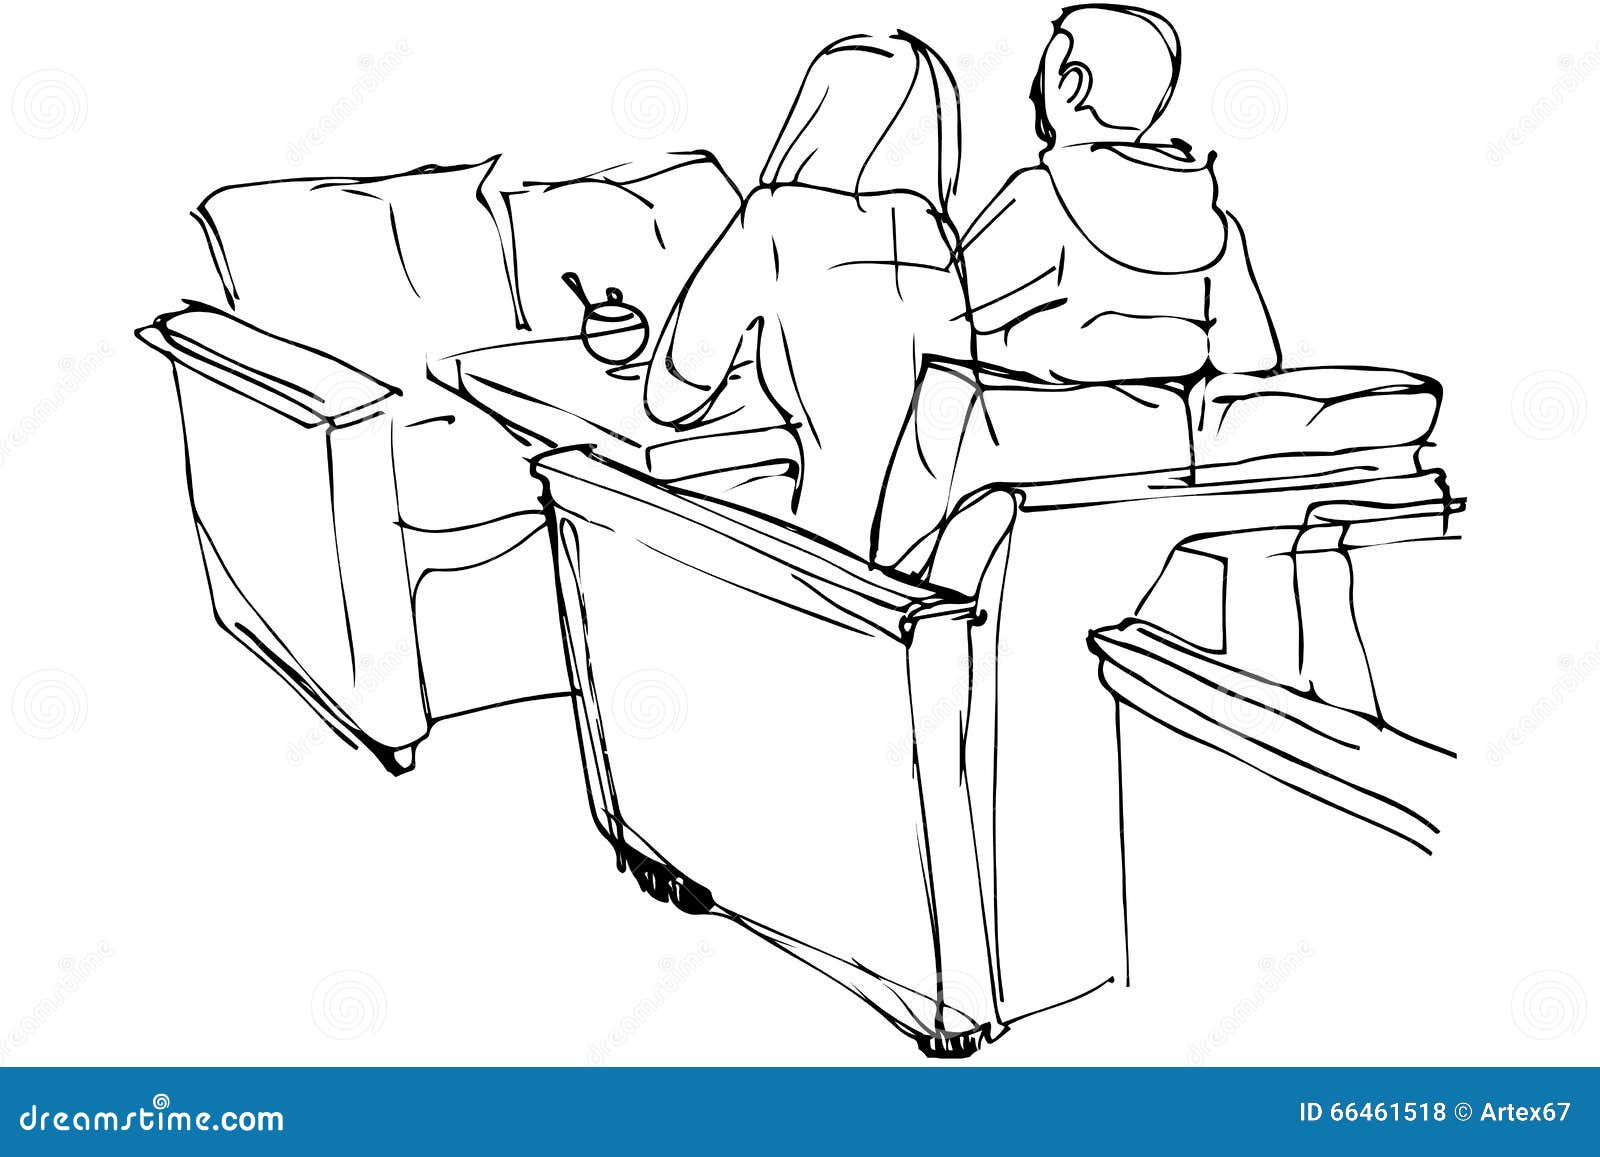 Vector Sketch Of Man And Woman Sitting On A Couch In A Cafe Stock Photo